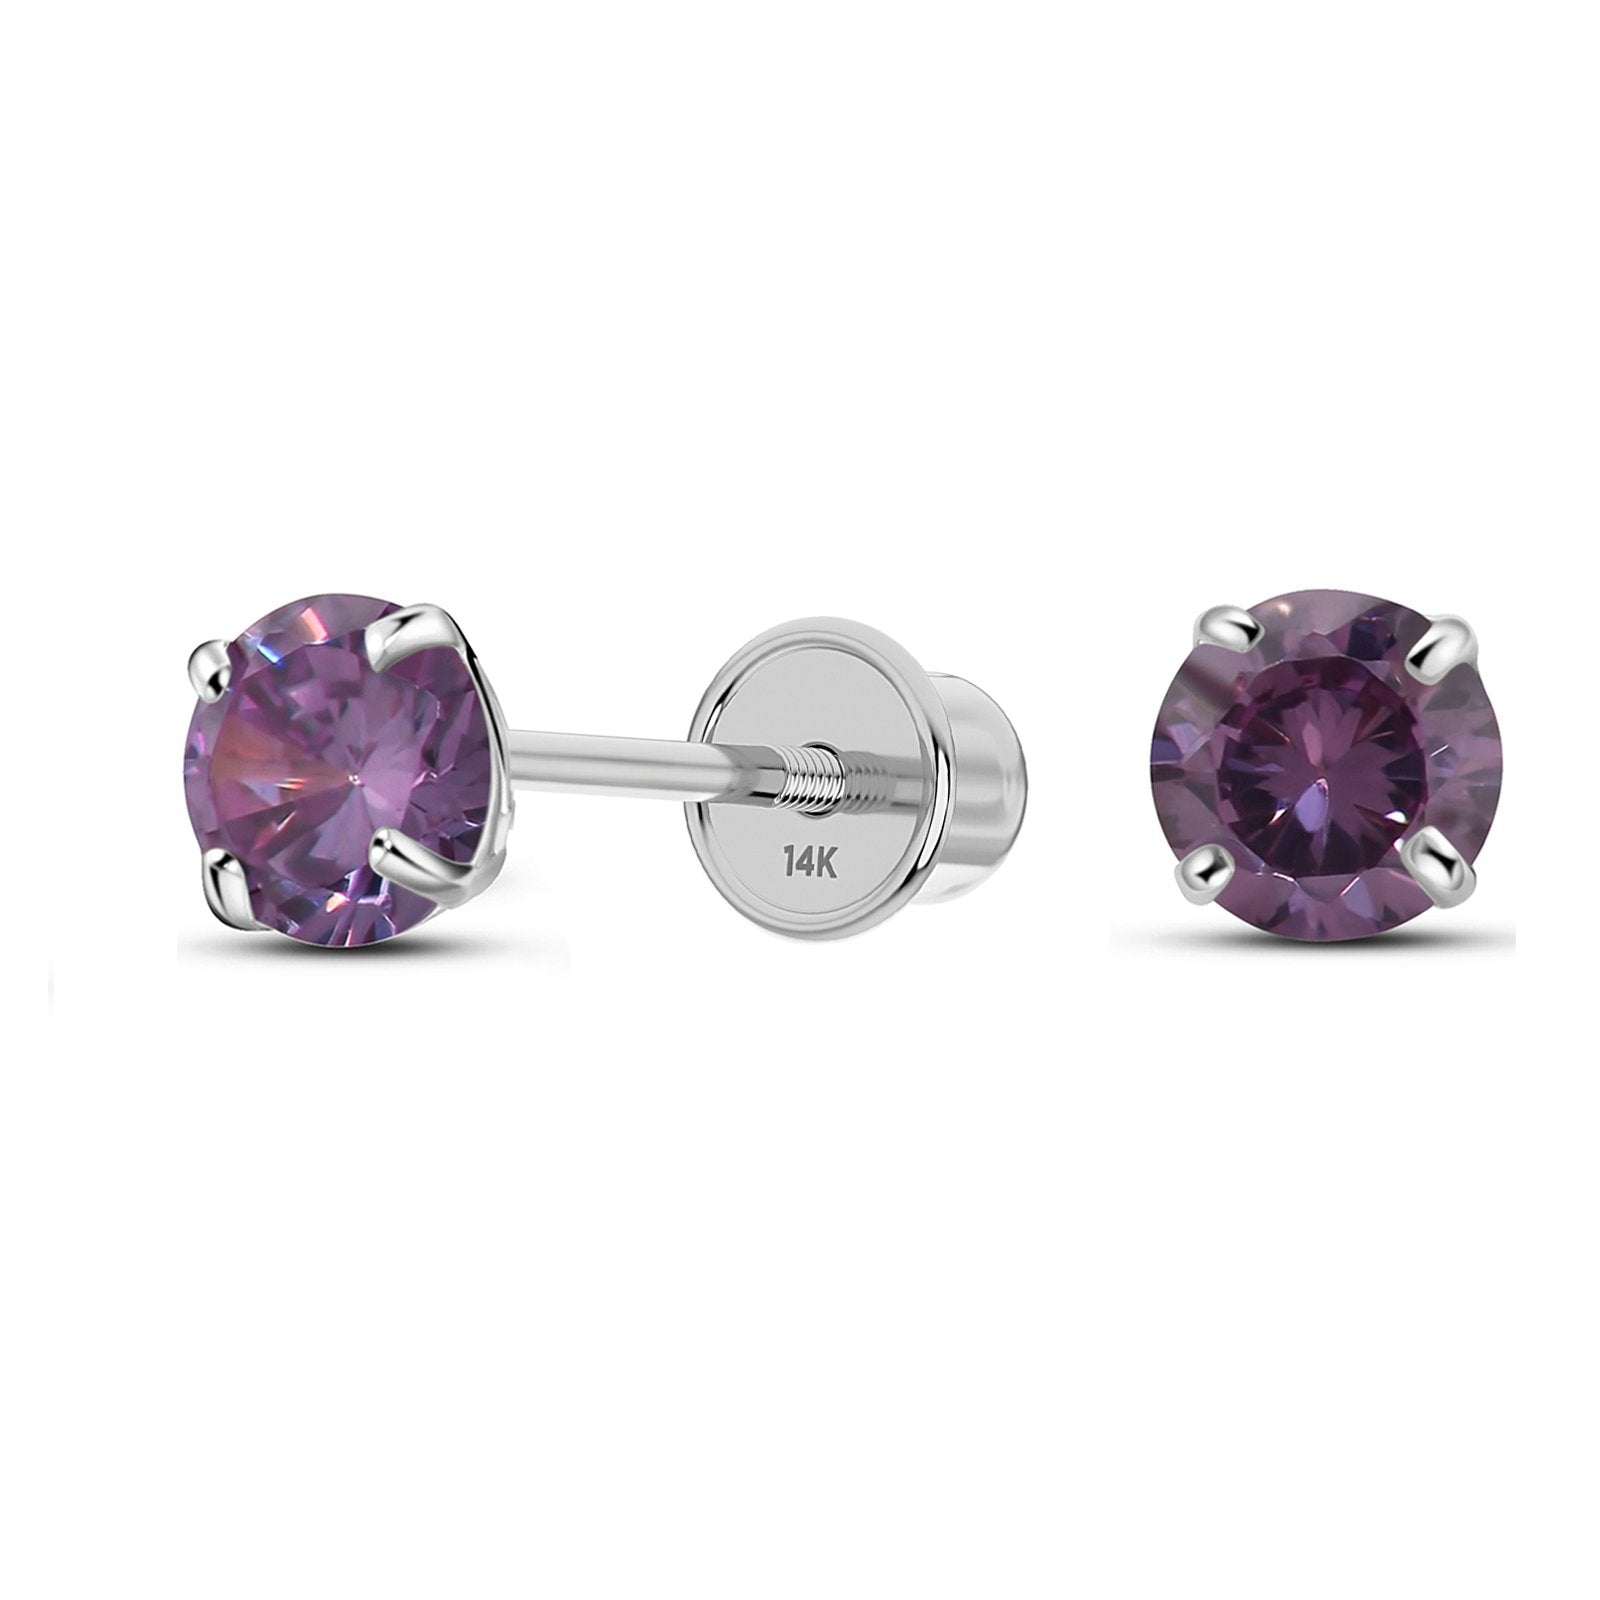 Solid 14K White Gold Round Solitaire Simulated-Amethyst-Birthstone